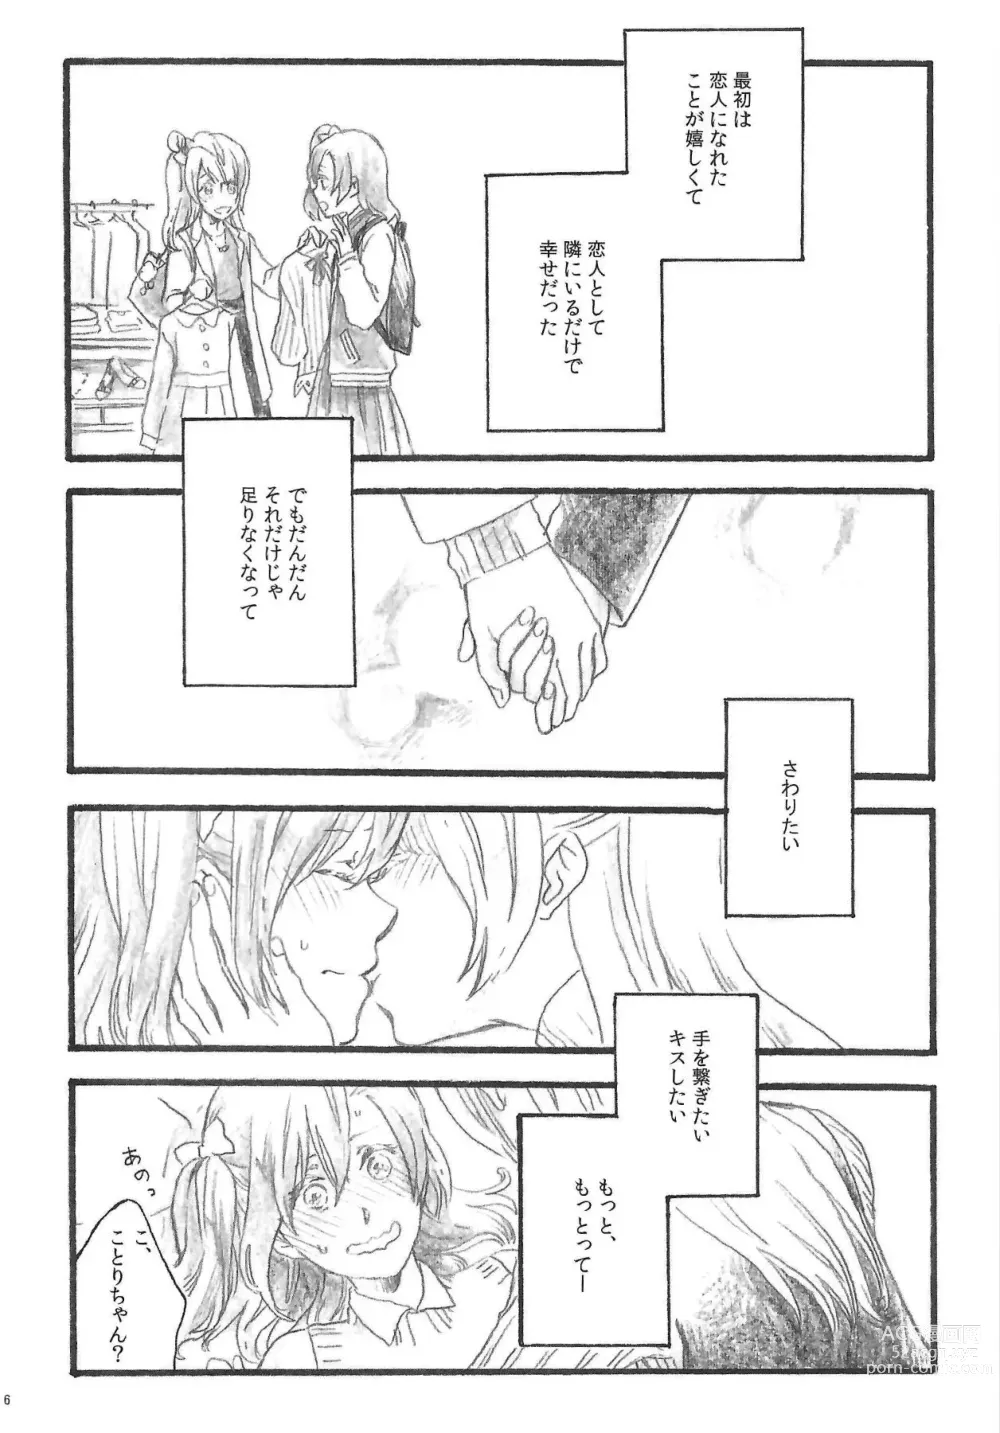 Page 5 of doujinshi a little more